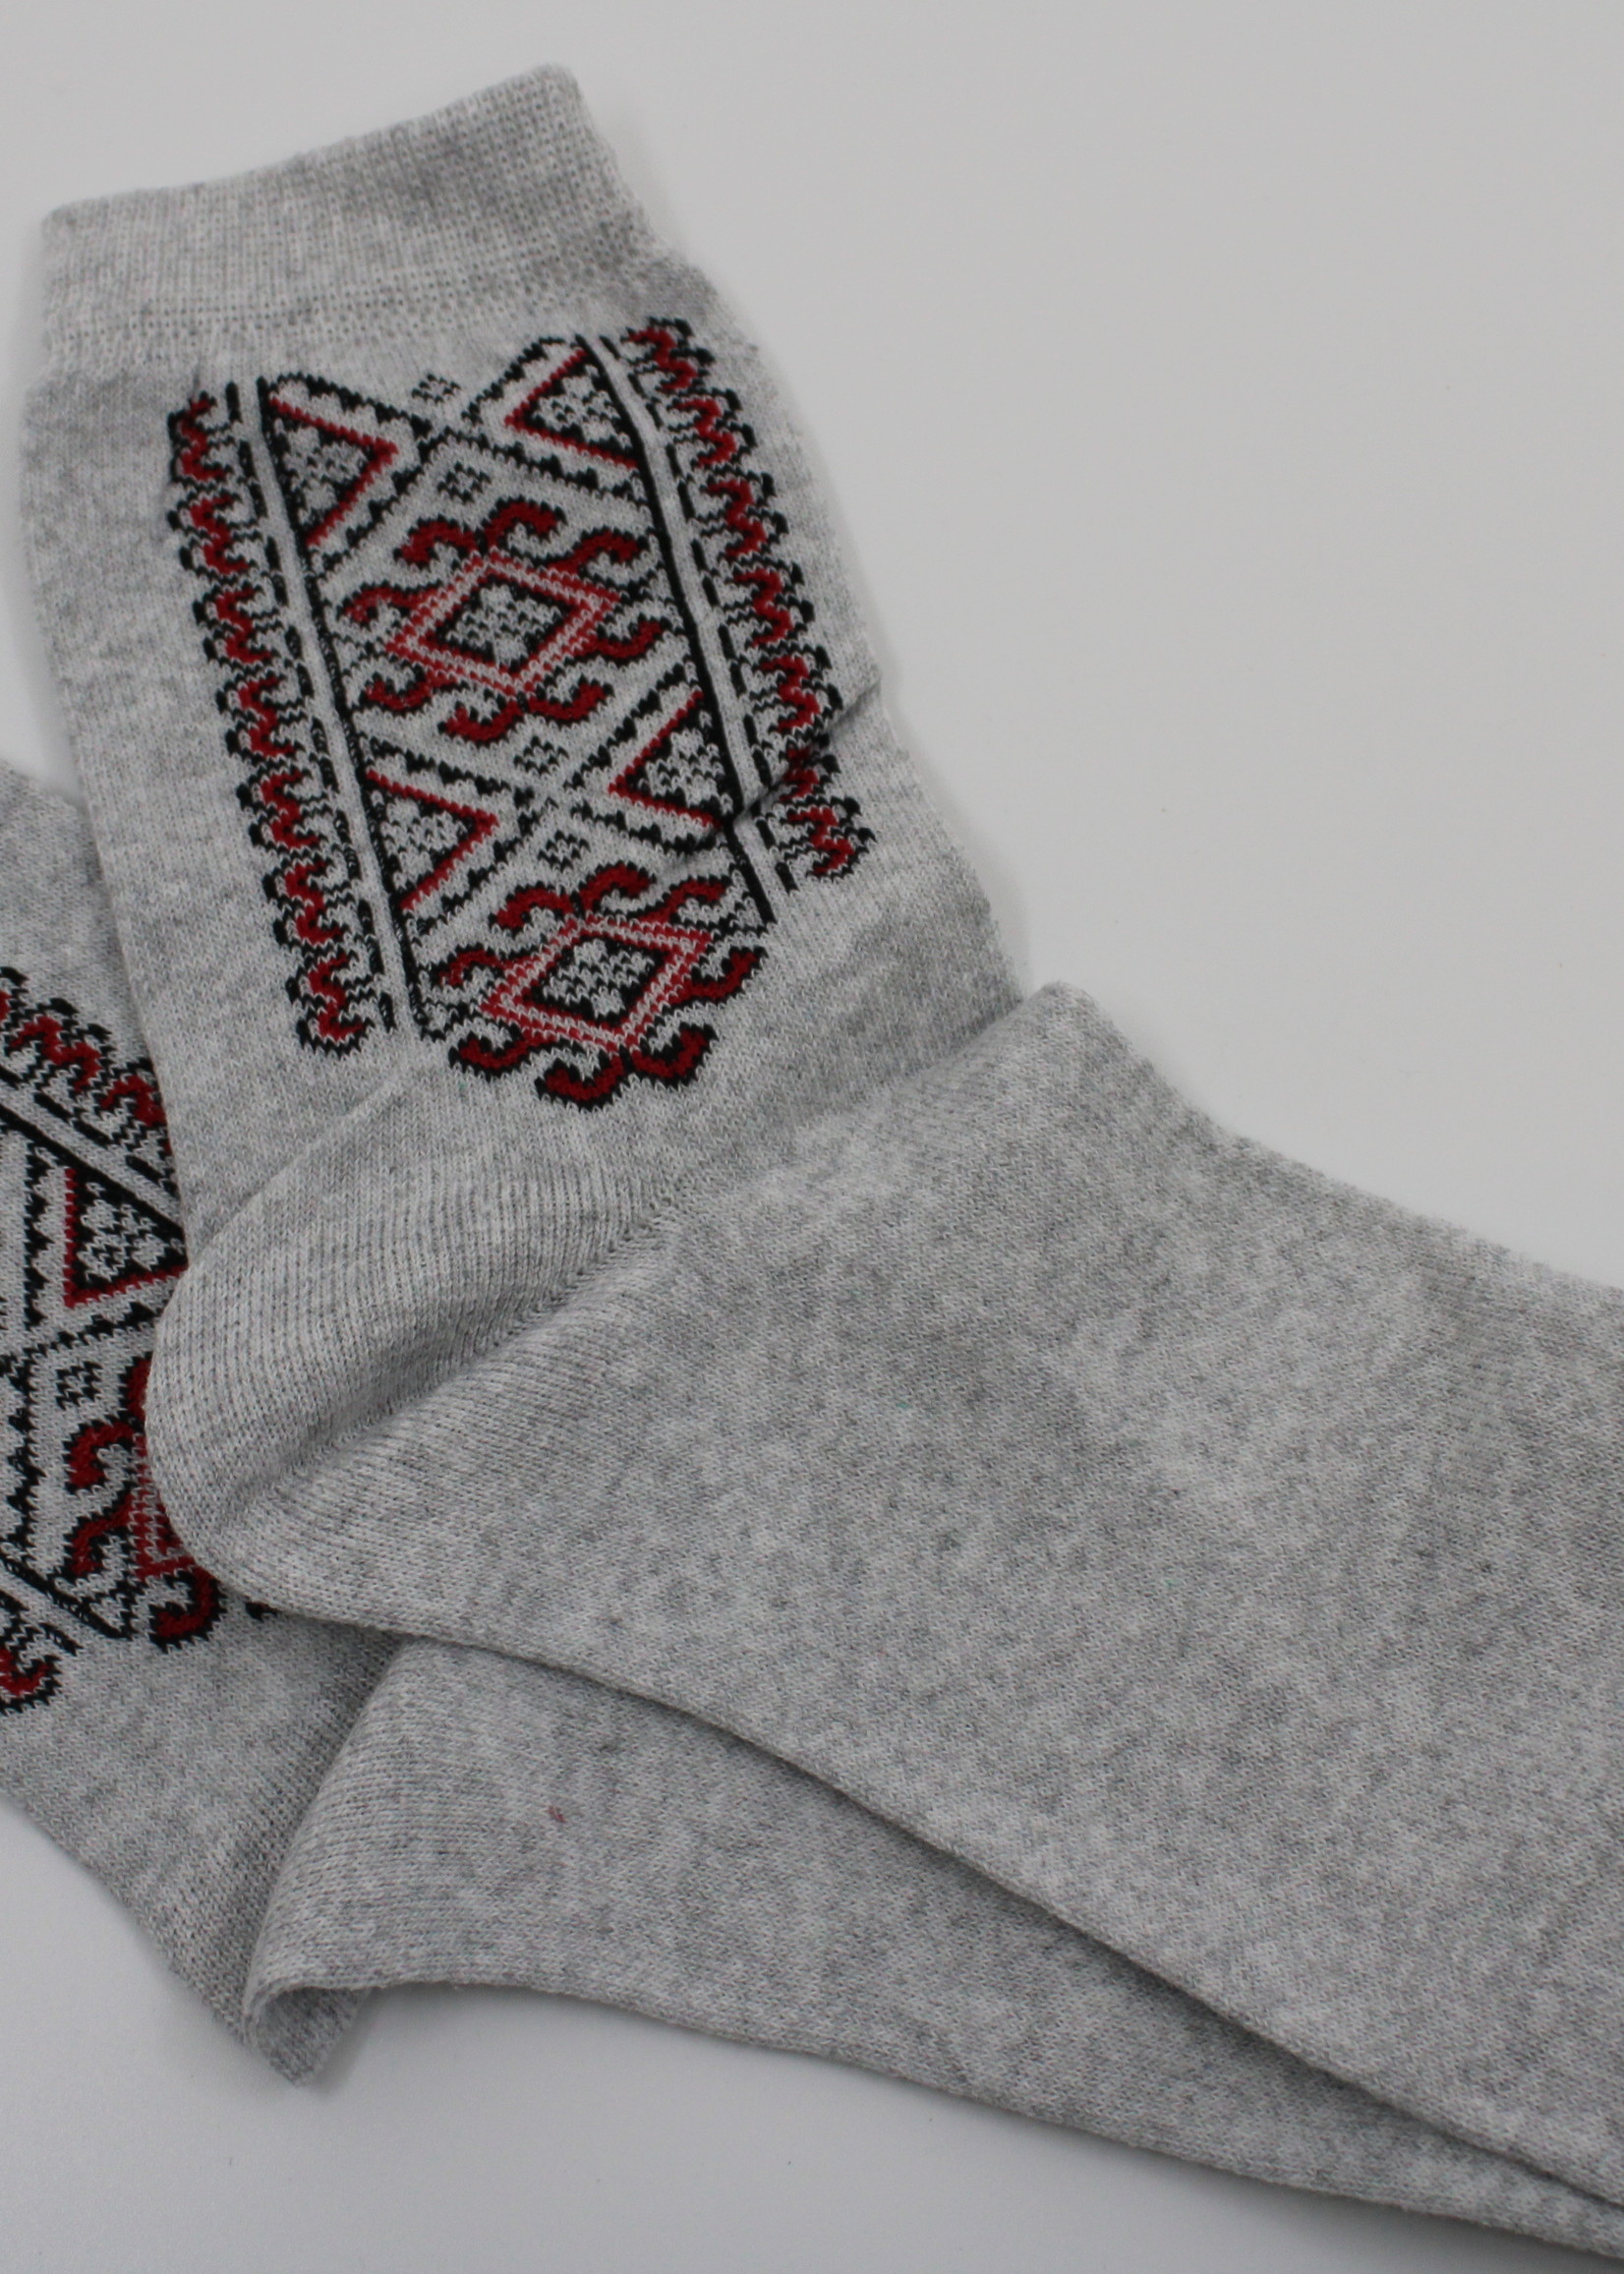 Grey Socks with Black and Red Embroidery